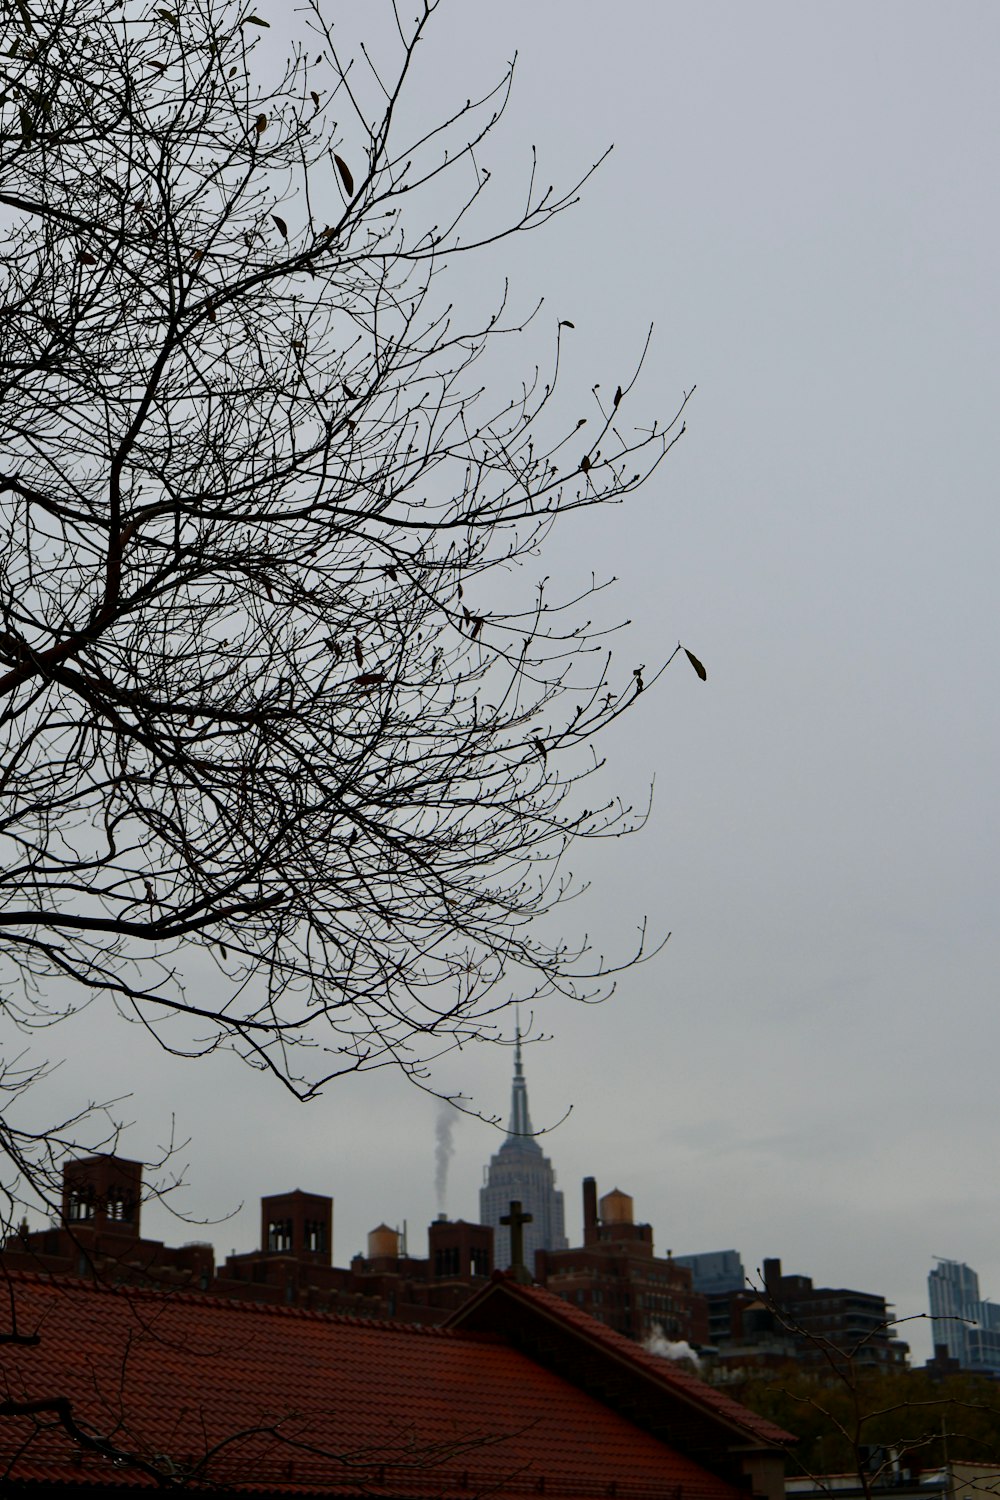 a tree with no leaves in front of a city skyline